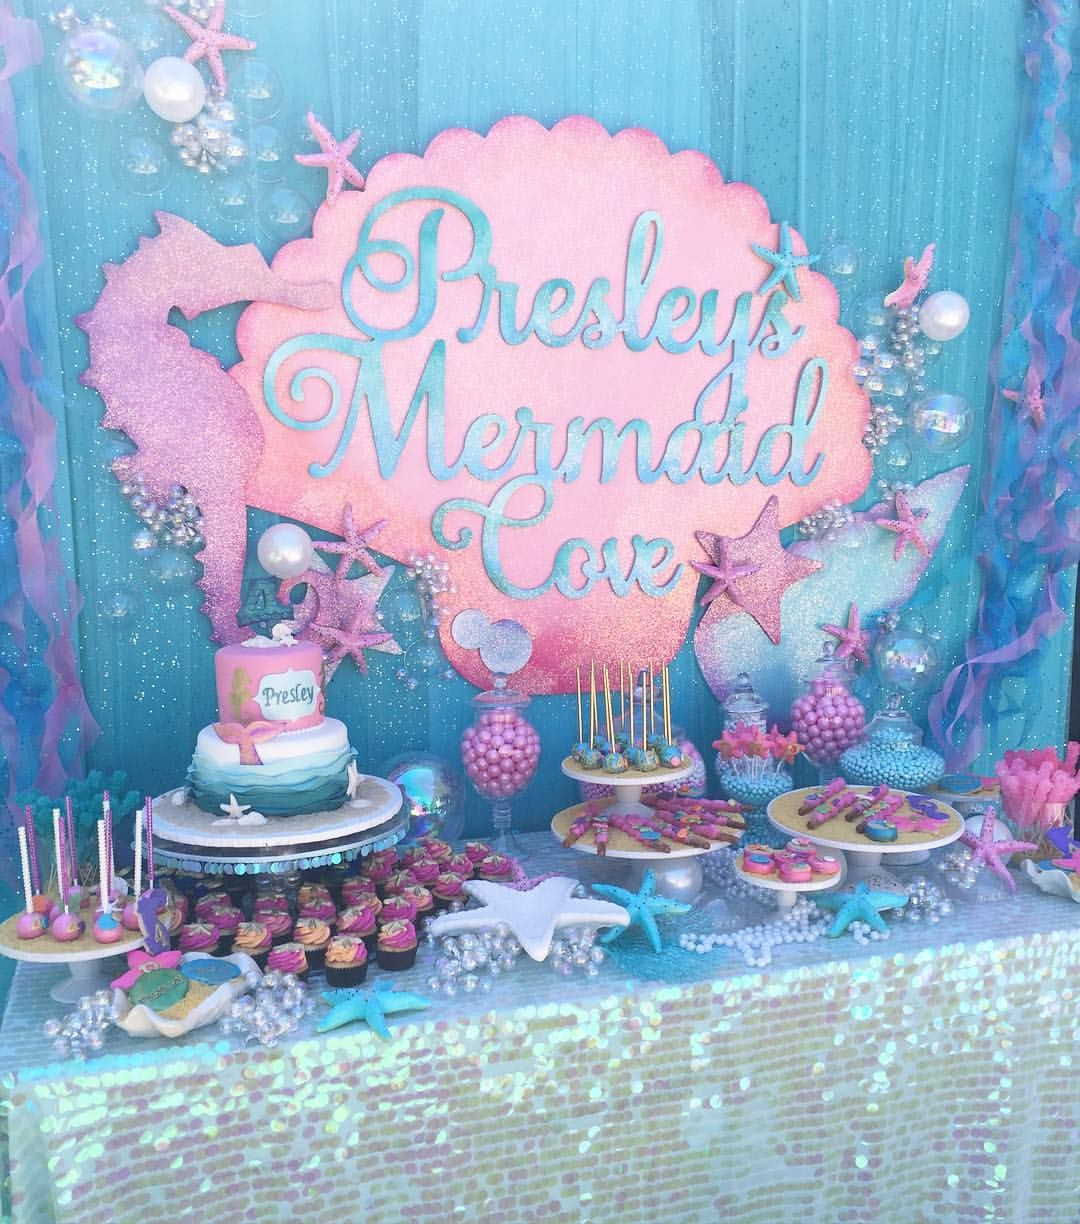 Mermaid Party Decoration Ideas
 Up bright and early for the most adorable mermaid party